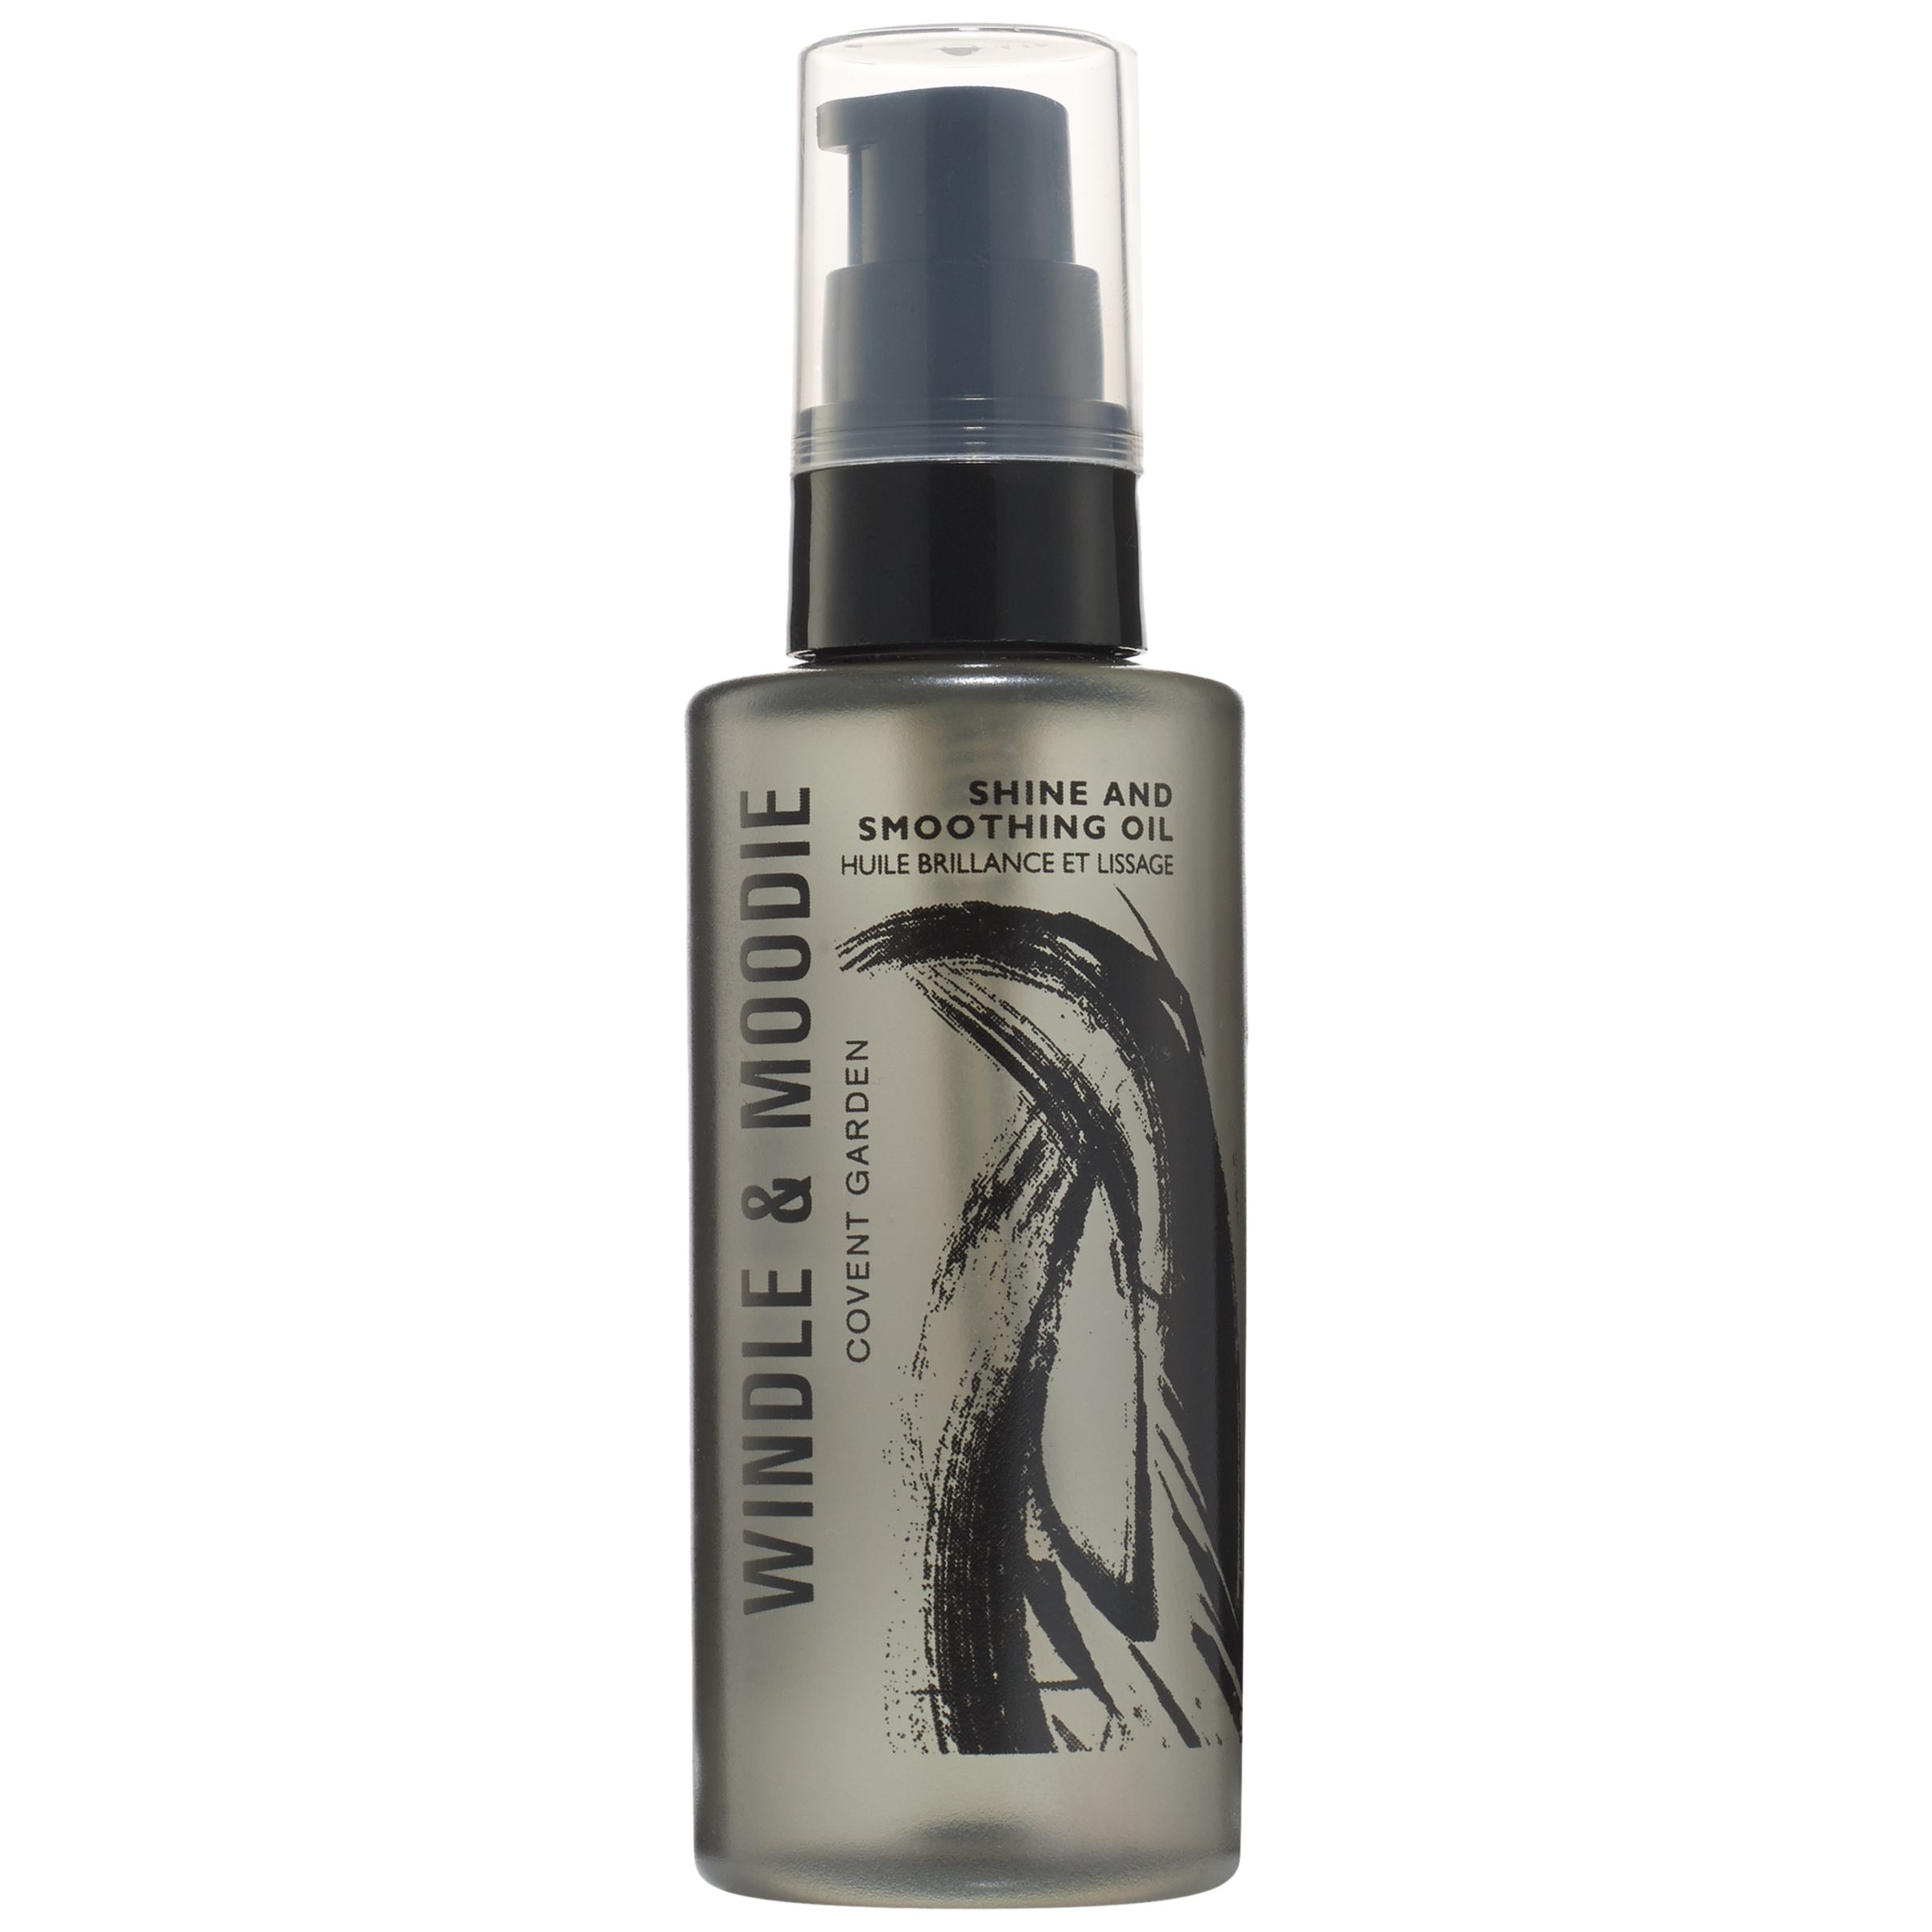 Windle & Moodie Shine & Smoothing Oil, 75ml